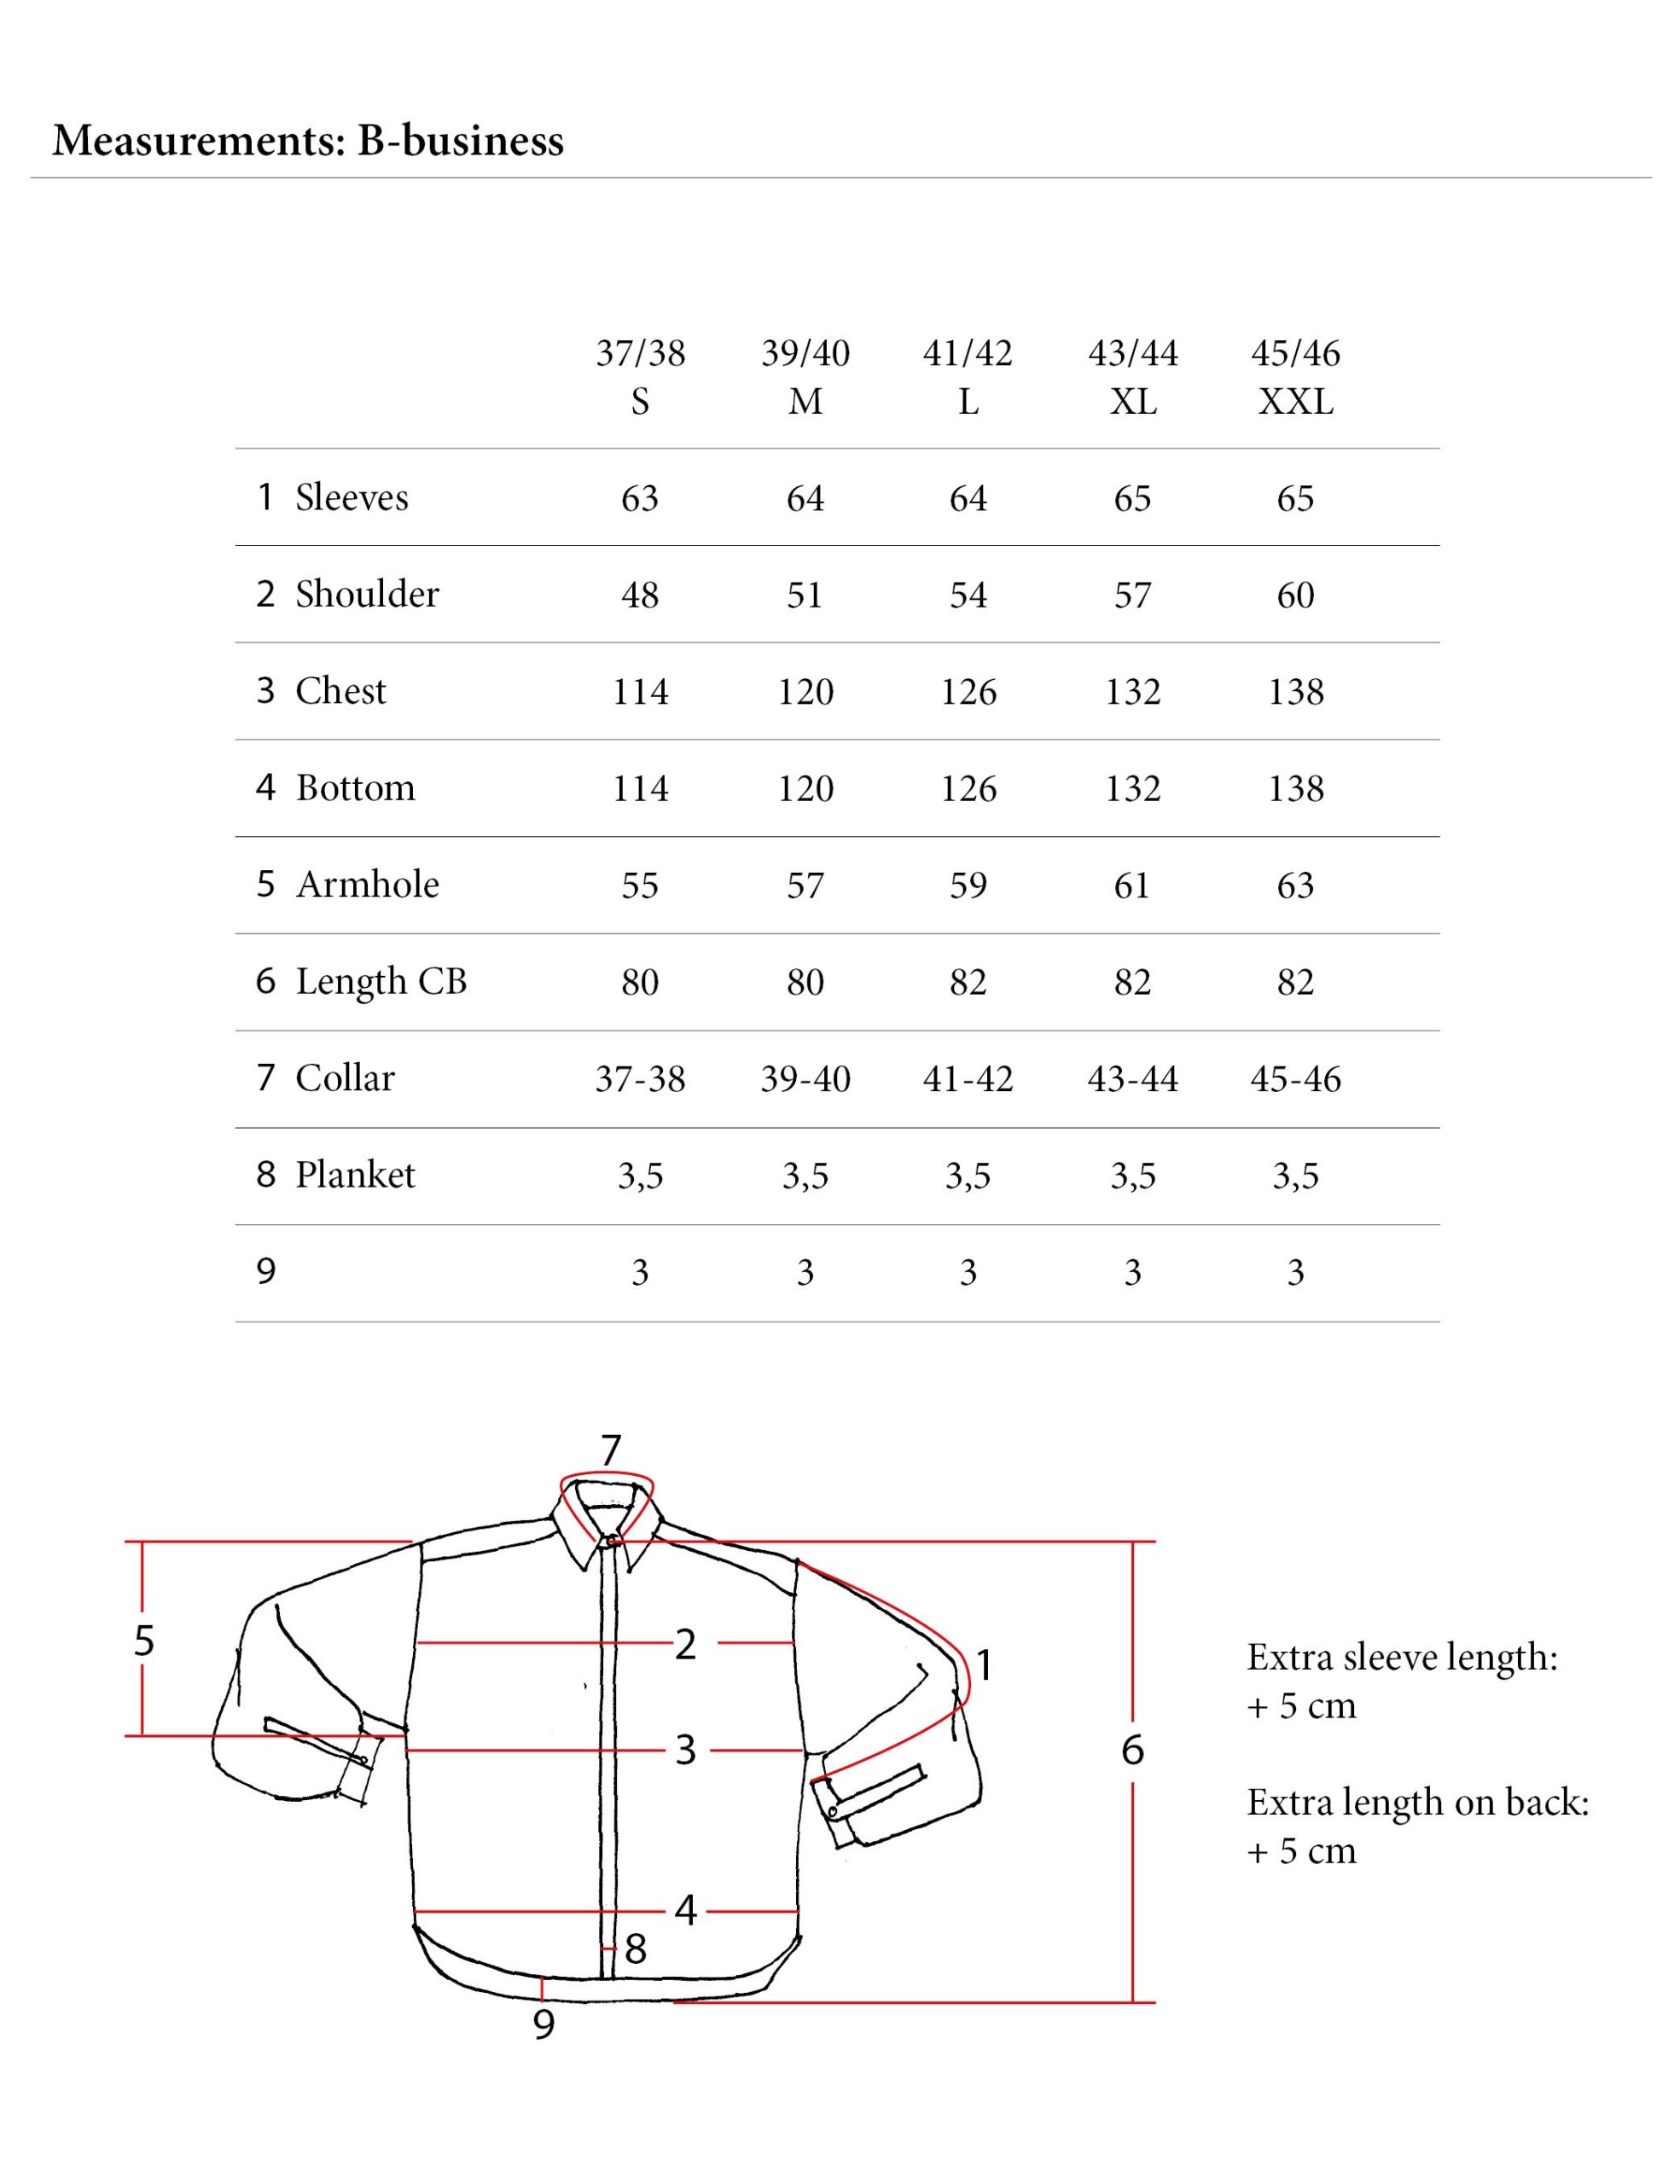 Fit/Size Guide